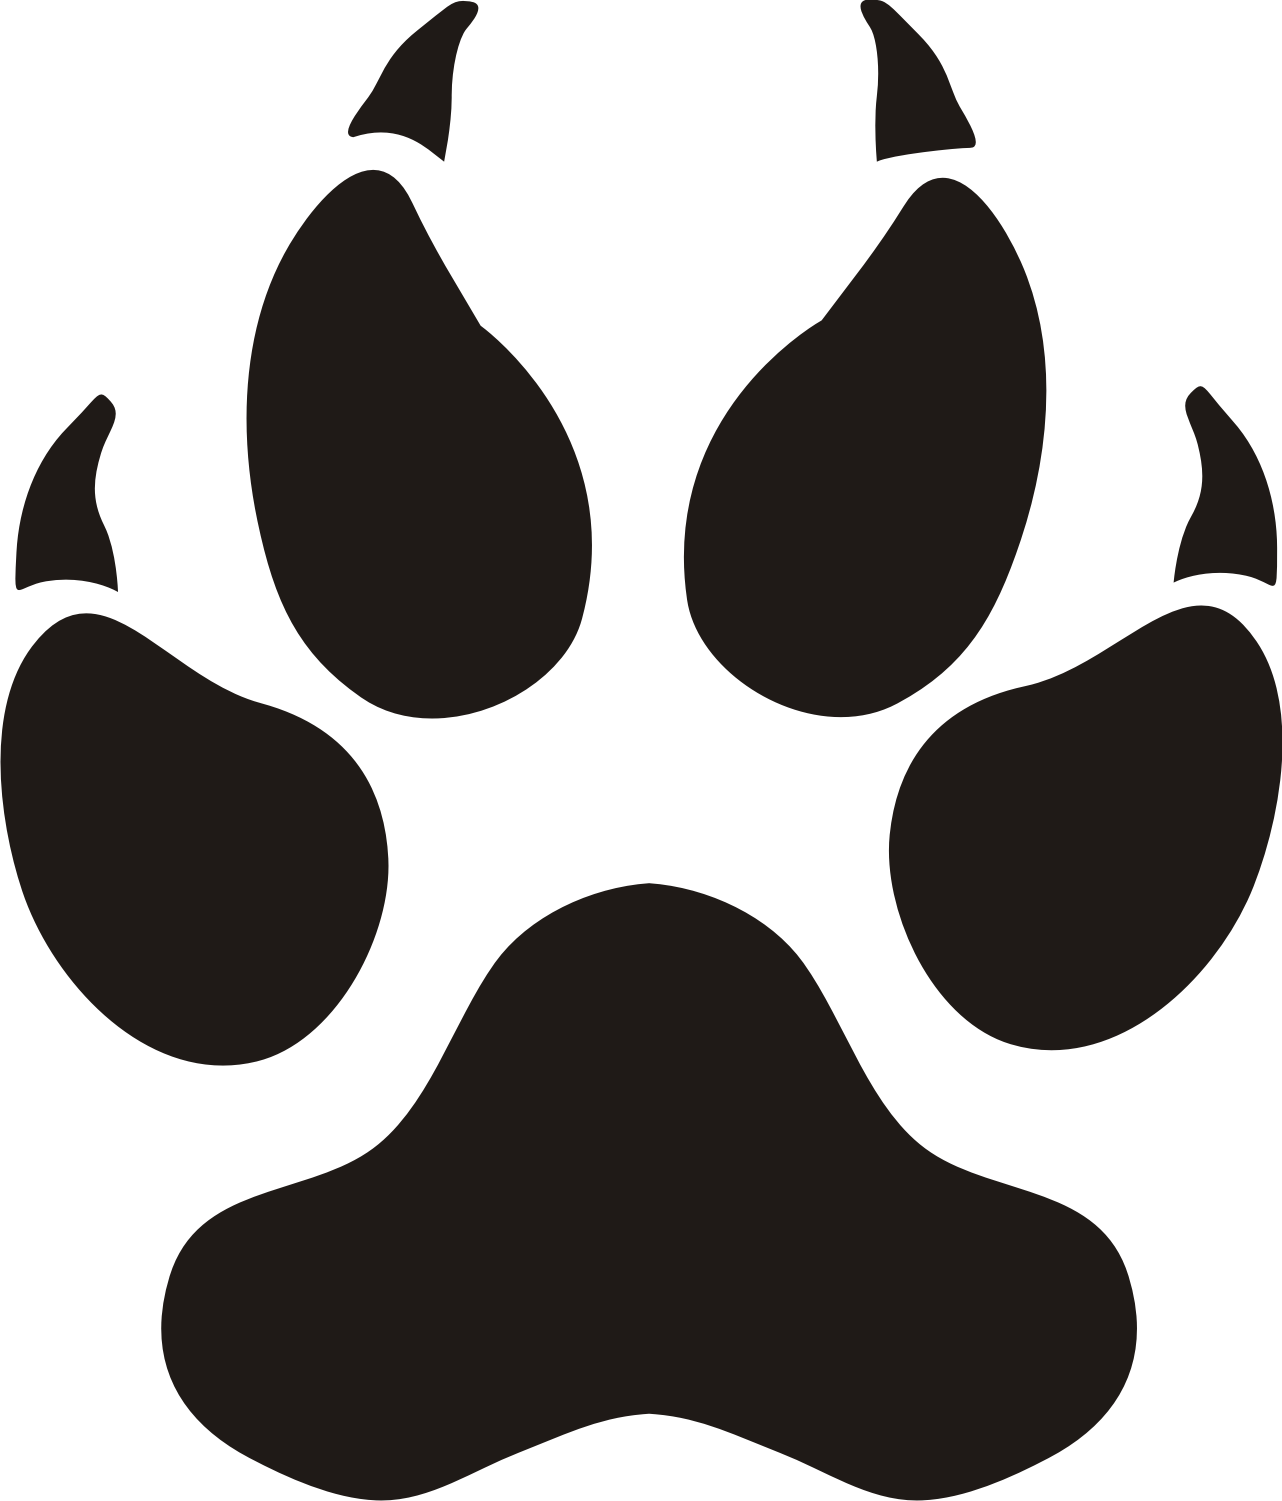 Paw Prints Of A Black Panther - Clipart library